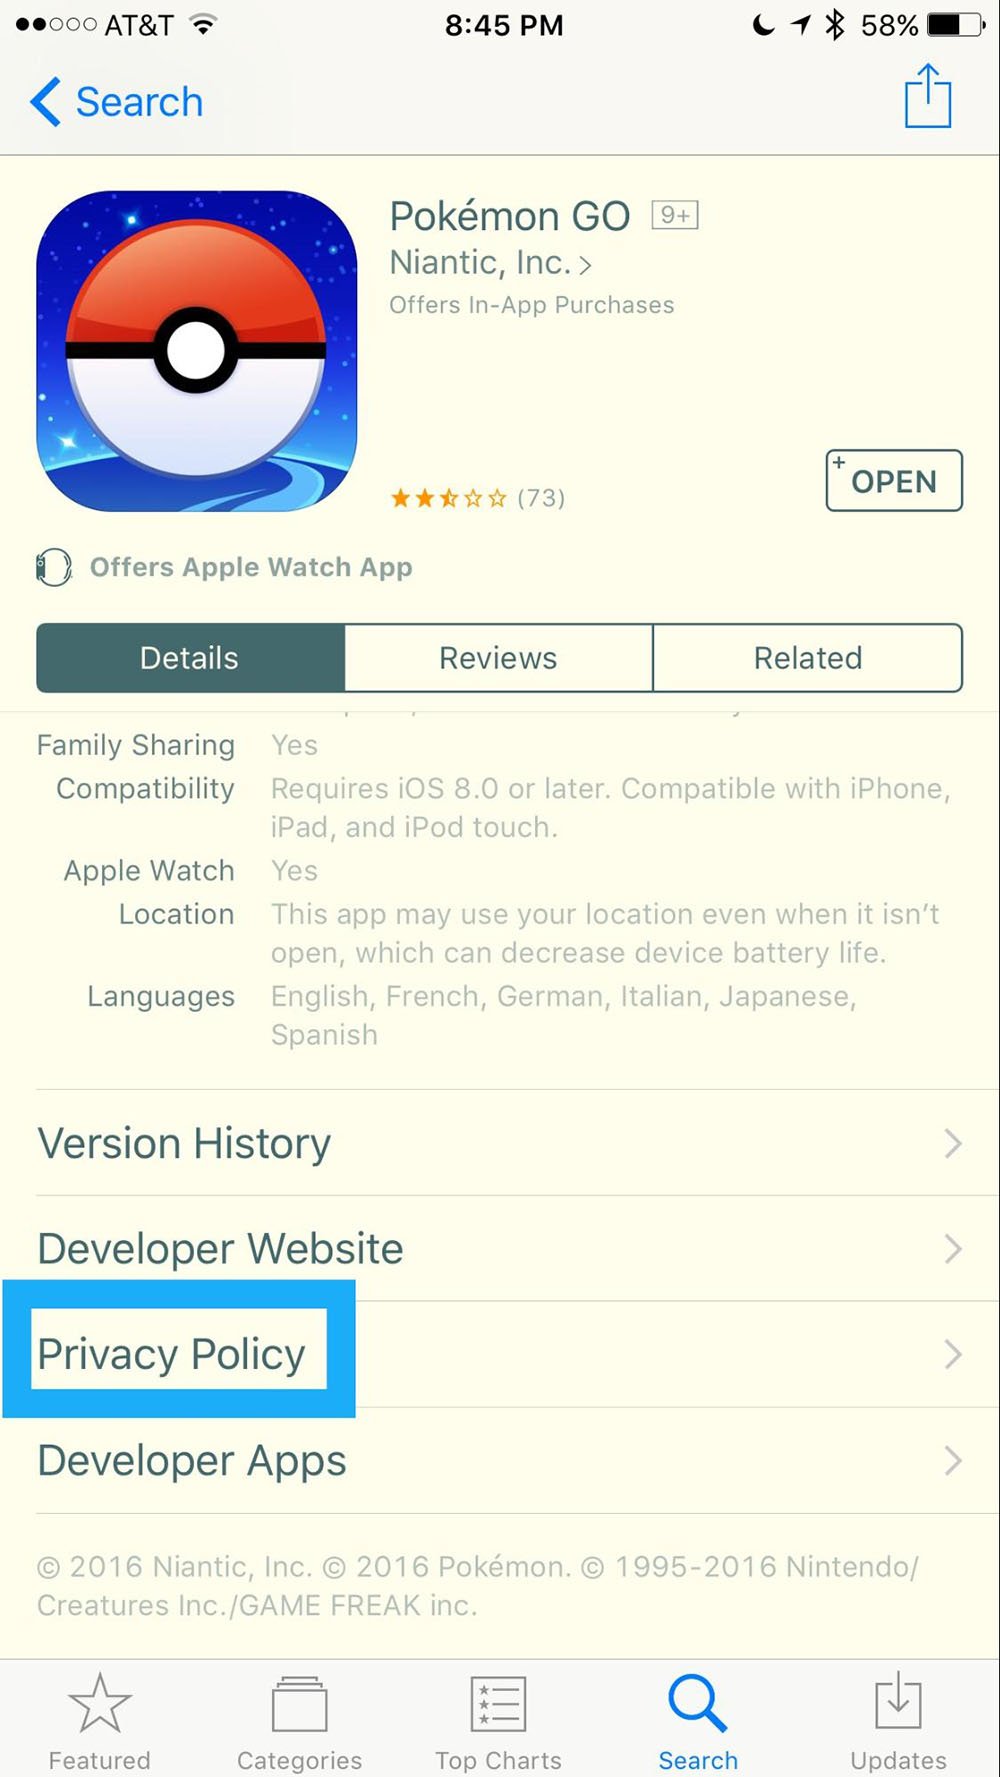 Pokemon GO mobile game in App Store: Highlight Privacy Policy link